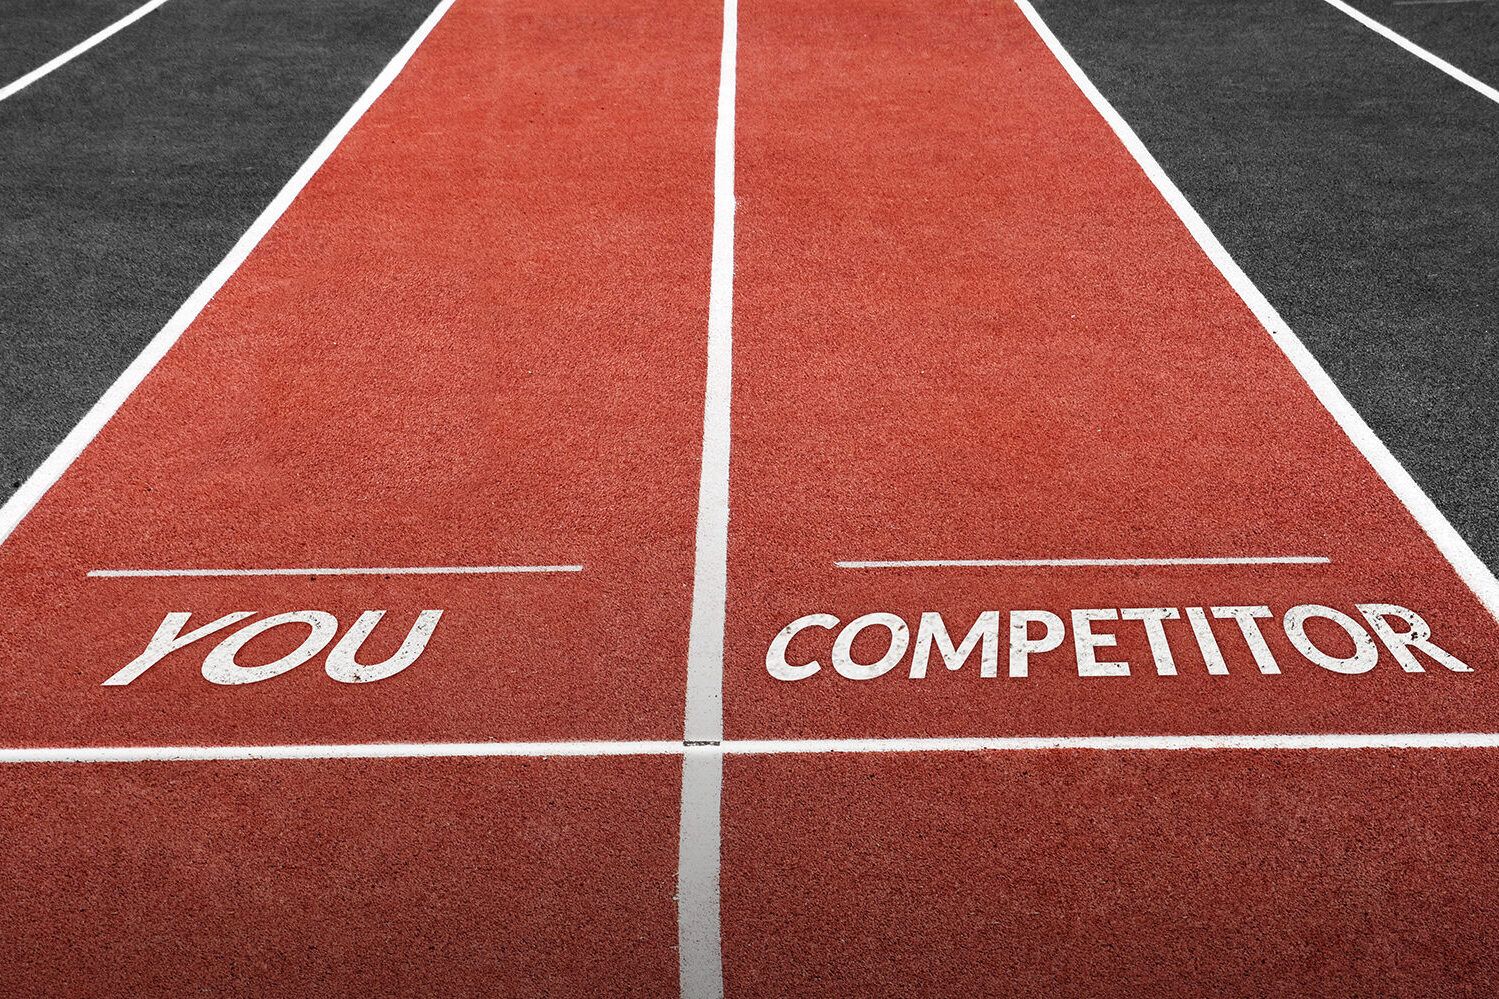 SEO Content Gap Analysis – Letting Competitors Drive Your Content